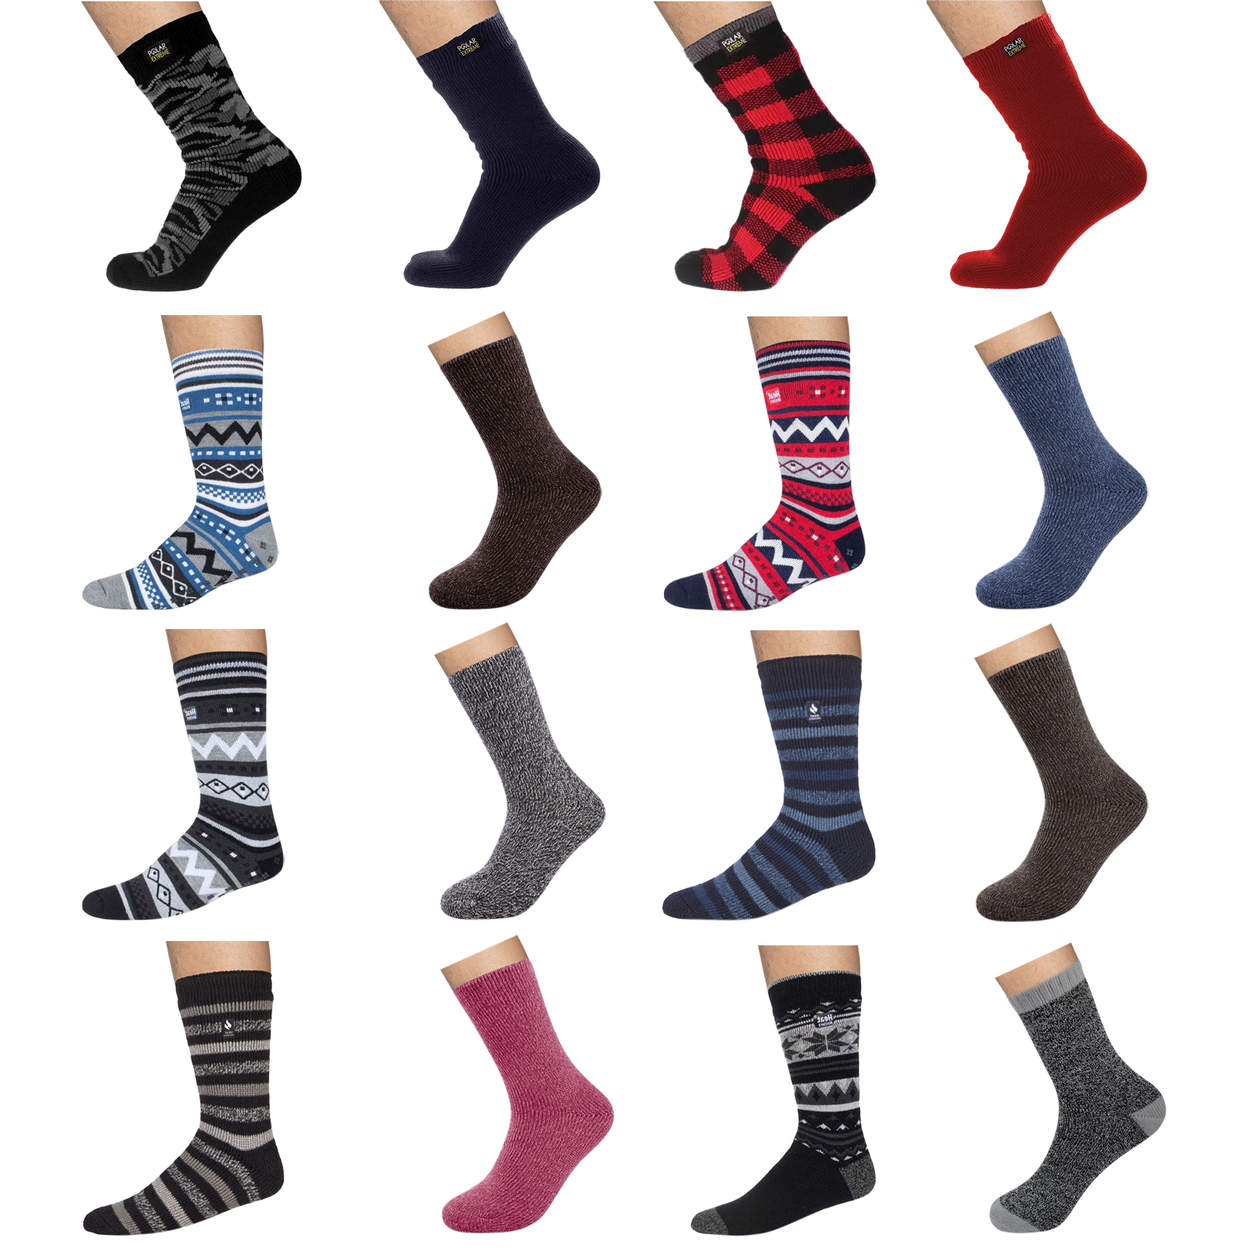 Multi-Pairs: Men's Polar Extreme Insulated Thermal Ultra-Soft Winter Warm Crew Socks - 2-pack